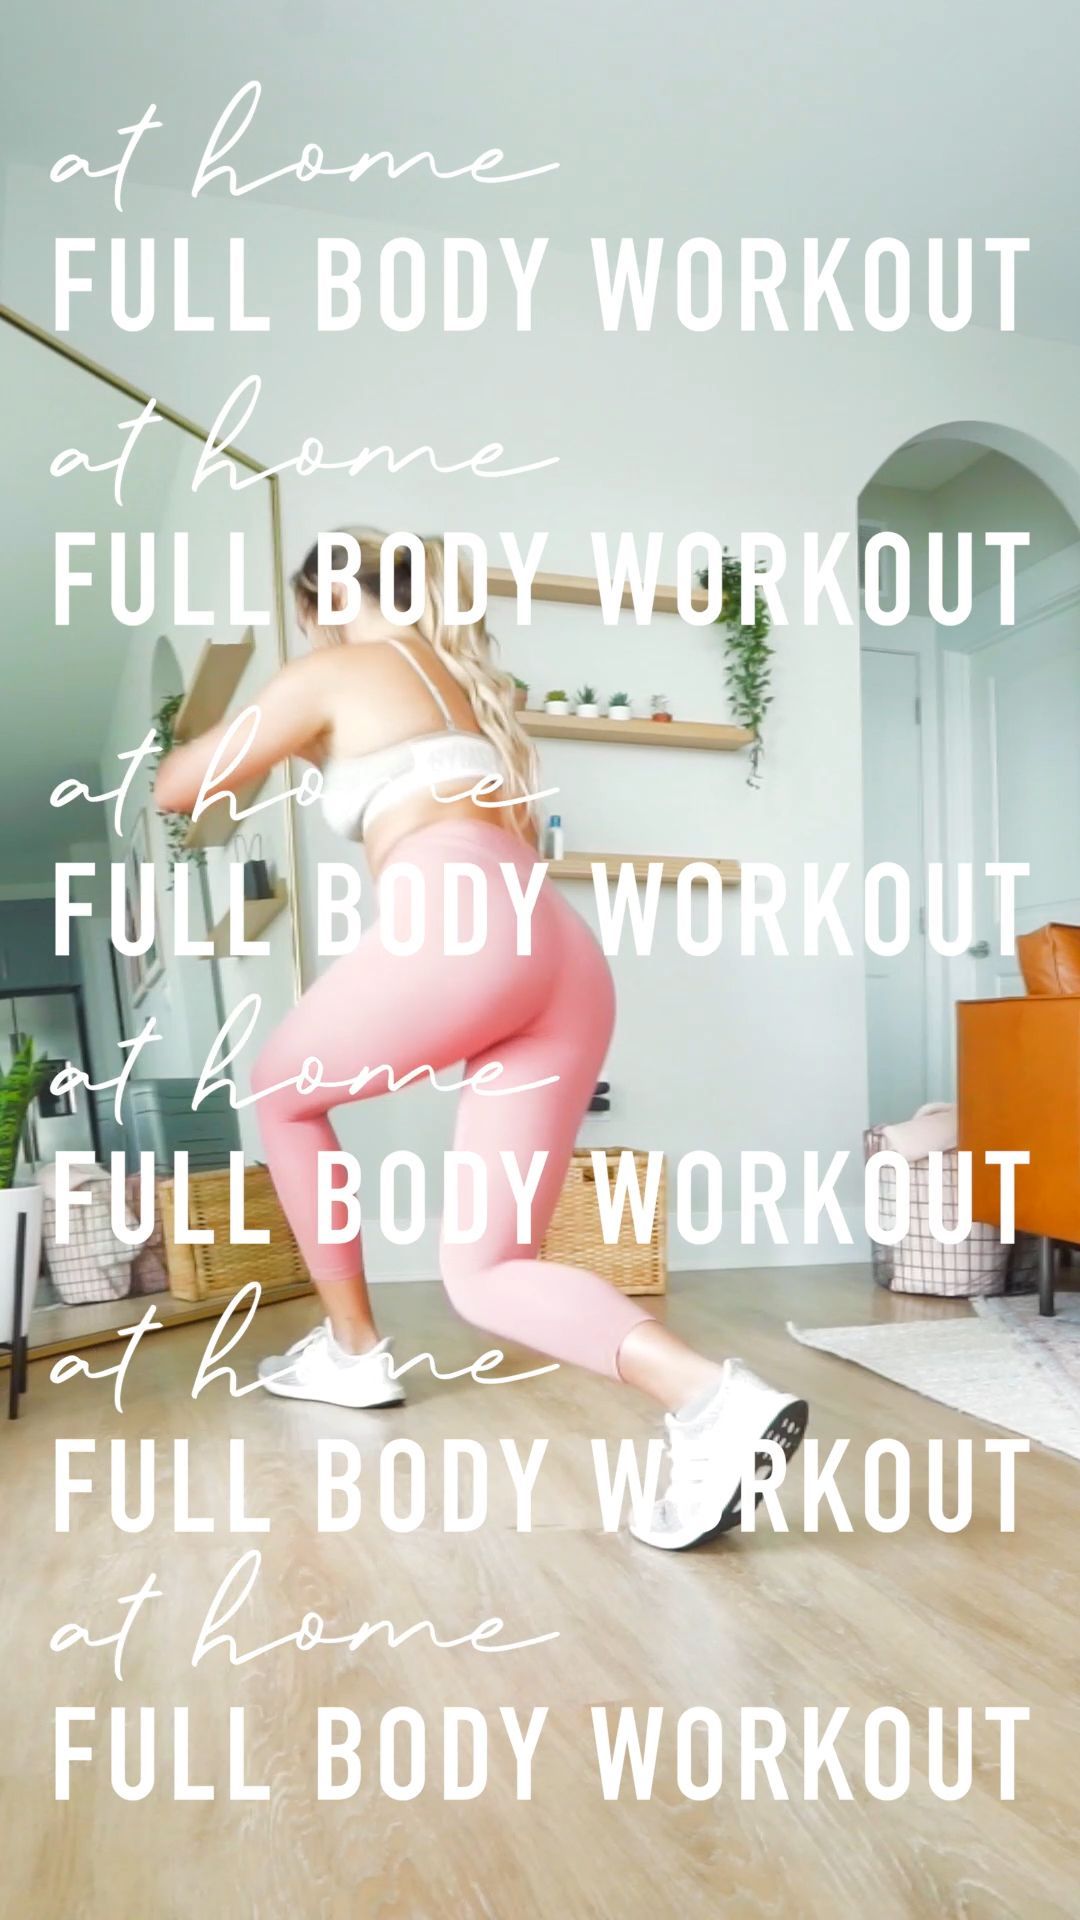 FULL BODY AT HOME WORKOUT from @biancaxxfranco on INSTAGRAM - FULL BODY AT HOME WORKOUT from @biancaxxfranco on INSTAGRAM -   10 fitness Instagram challenge ideas